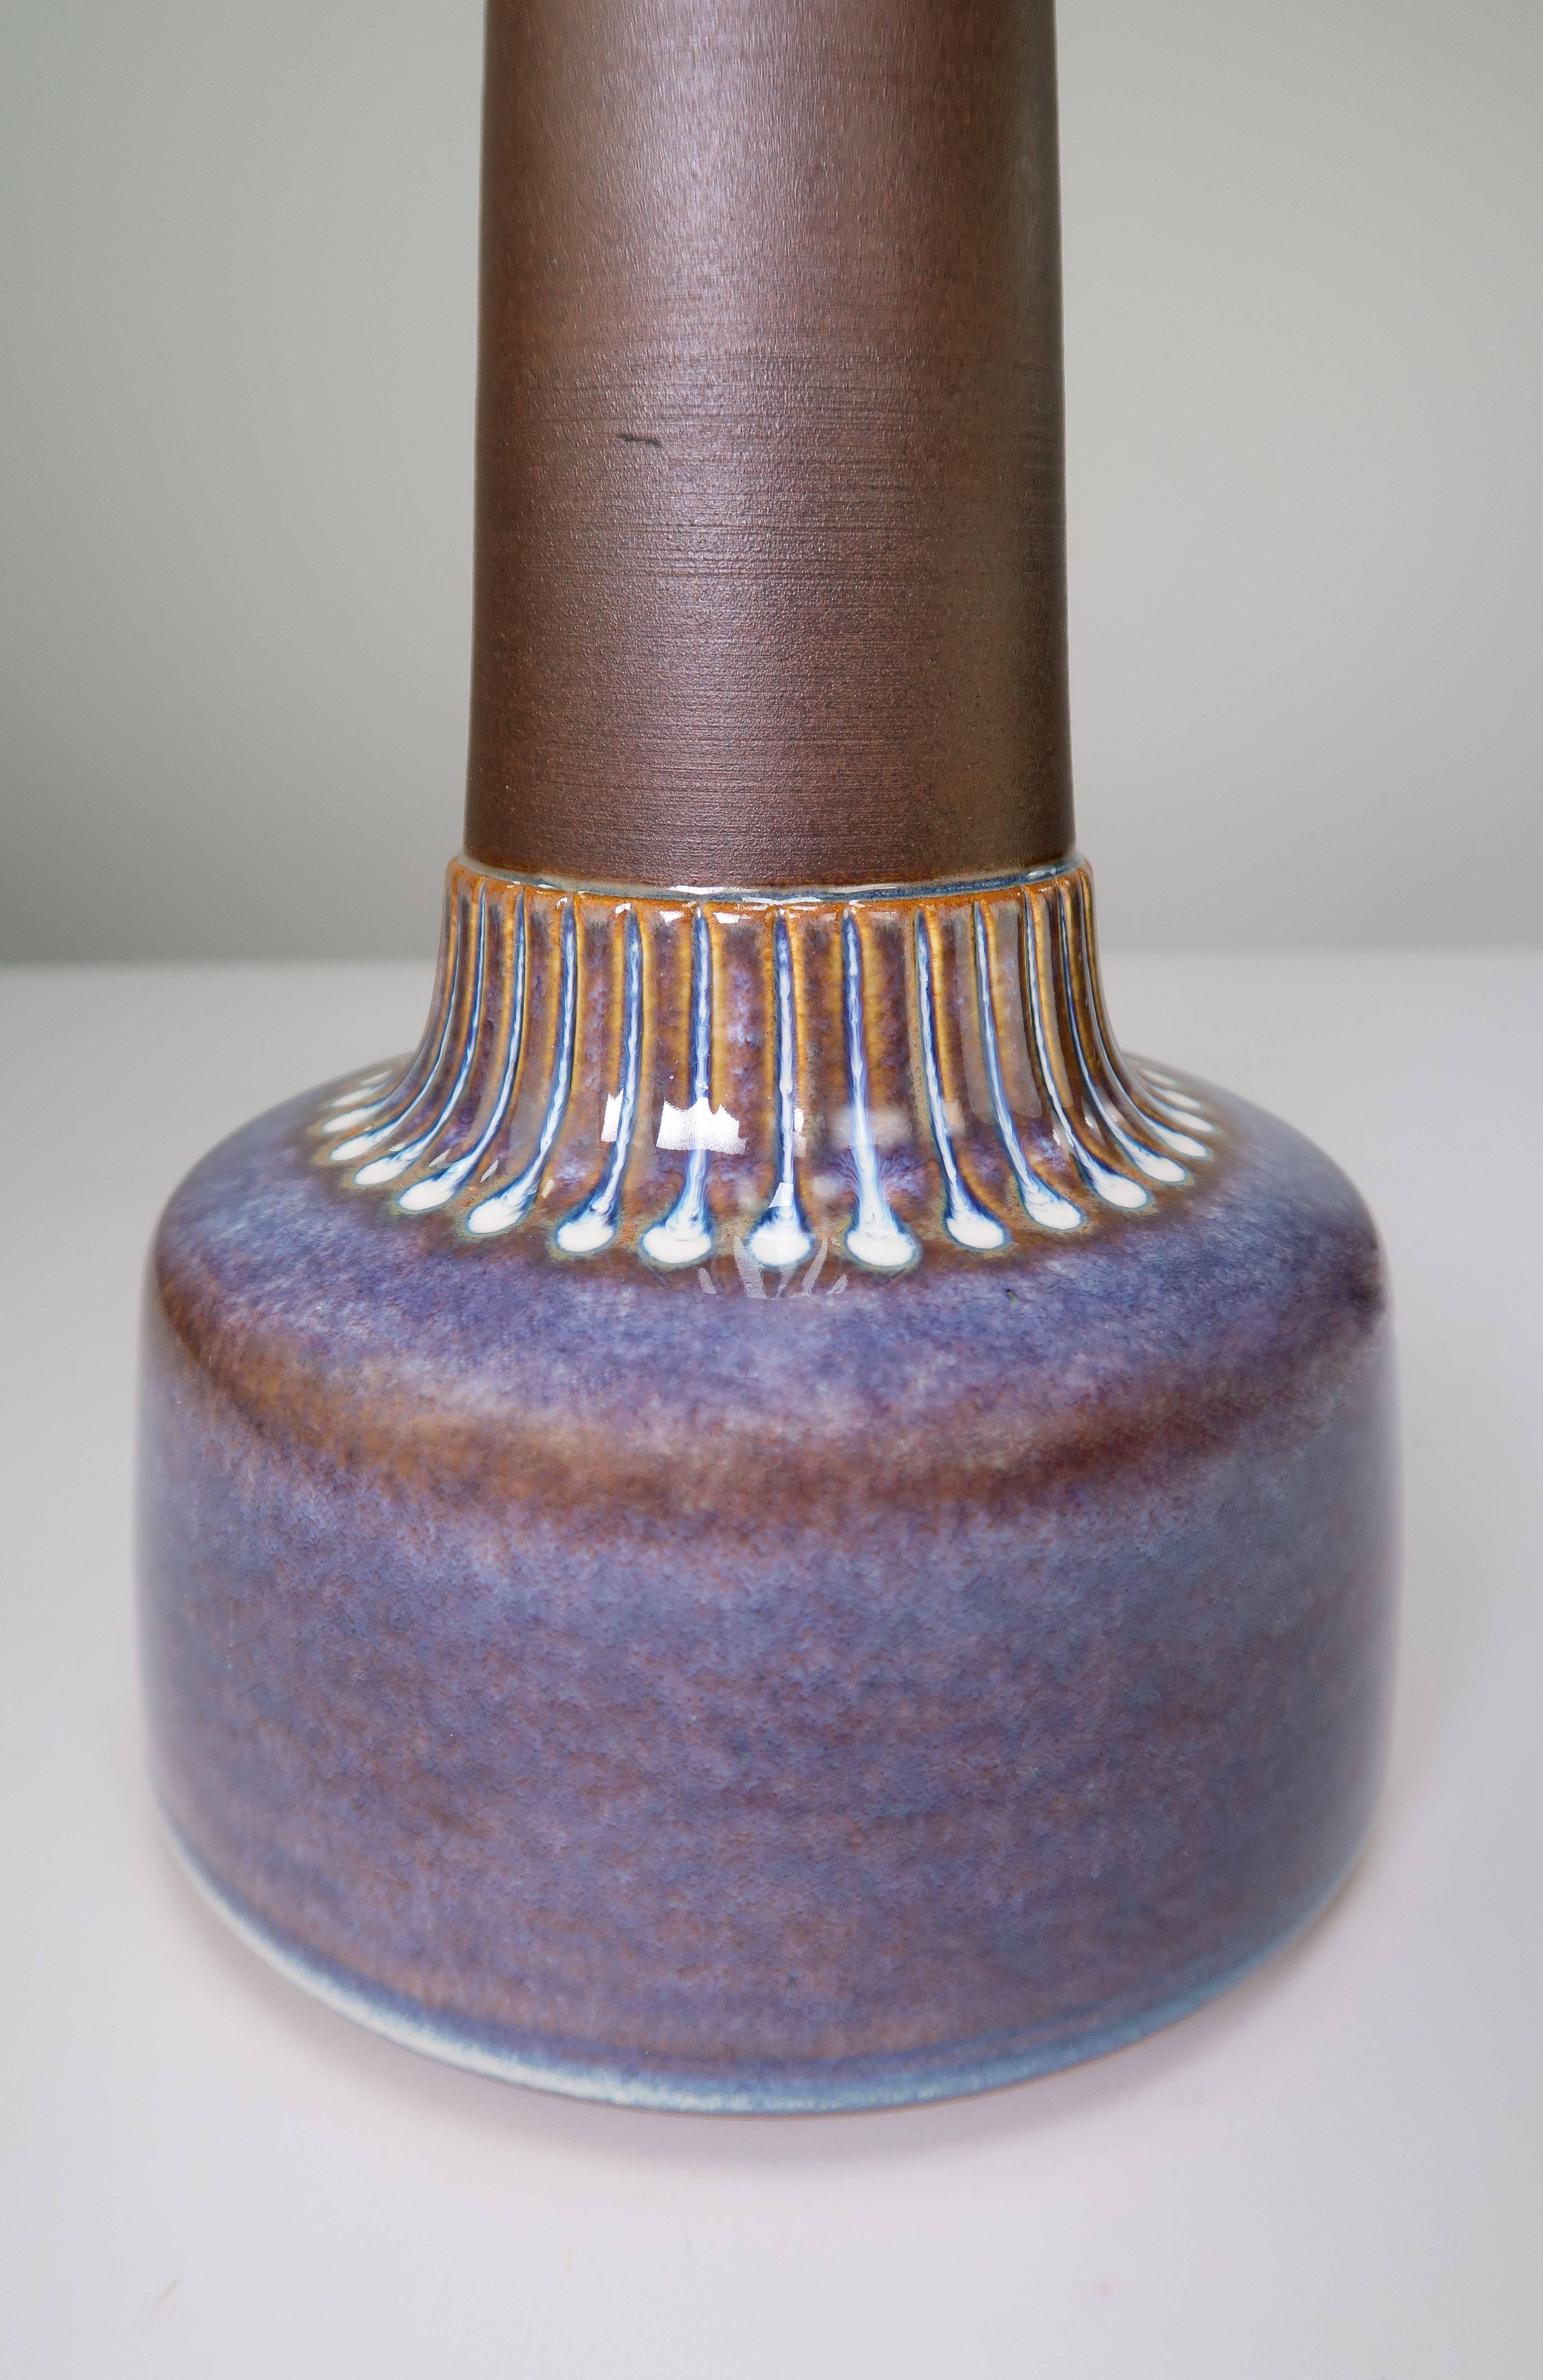 Rare violet colored version of this Einar Johansen model for Danish Soholm Pottery. Danish Mid-Century Modern stoneware table lamp in violet, plum and white colors with a hickory brown neck. Model 1080-1. Signed and stamped on the glazed base. E27.